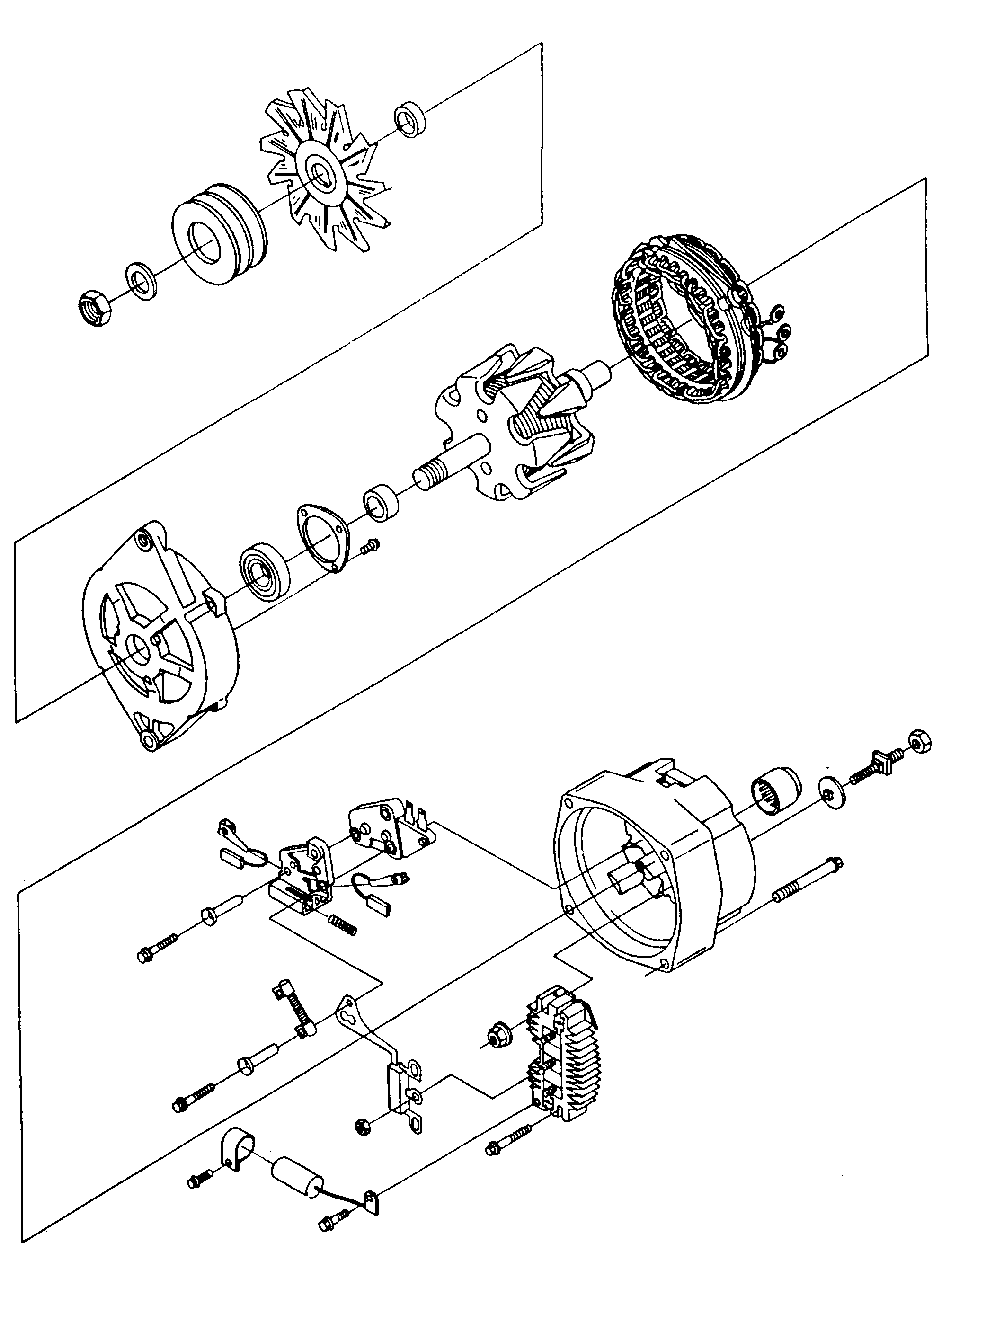 15 Si Alternator exploded view